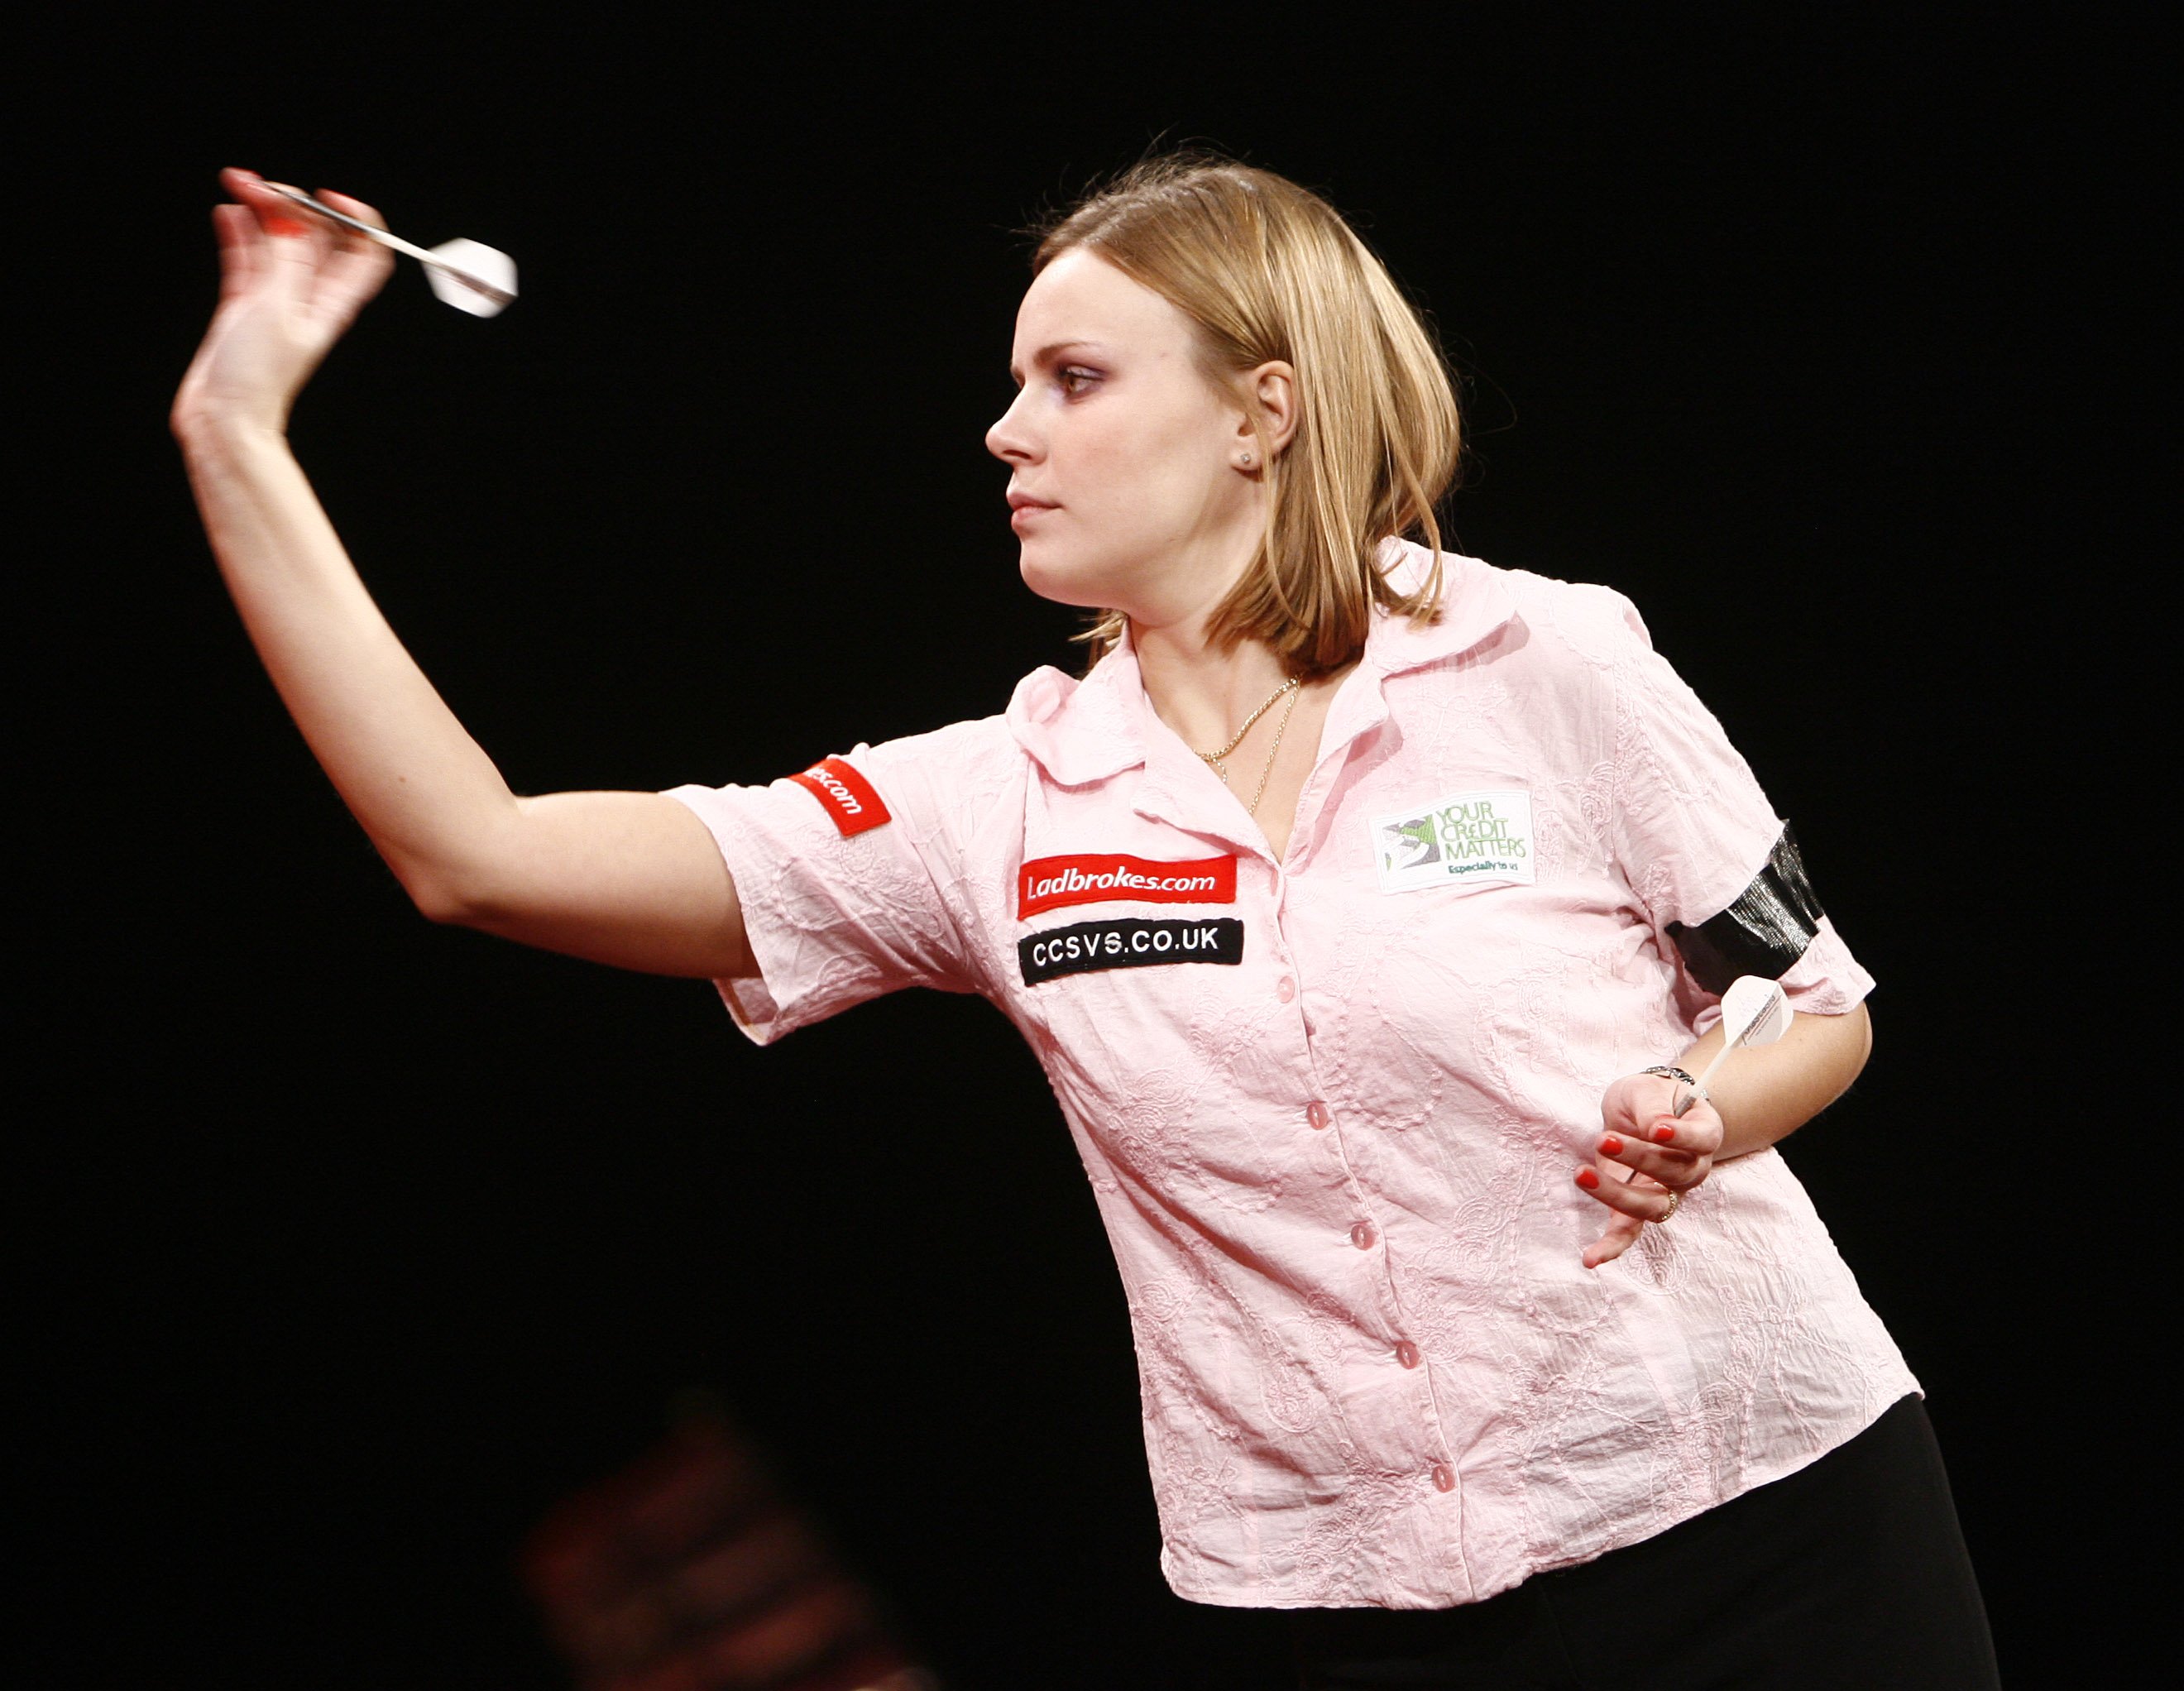 PDC Darts on Twitter: "WOMEN'S | two Women's Qualifiers for the William Hill Darts Championship have been confirmed. The qualifiers take place in Dusseldorf and Milton Keynes in